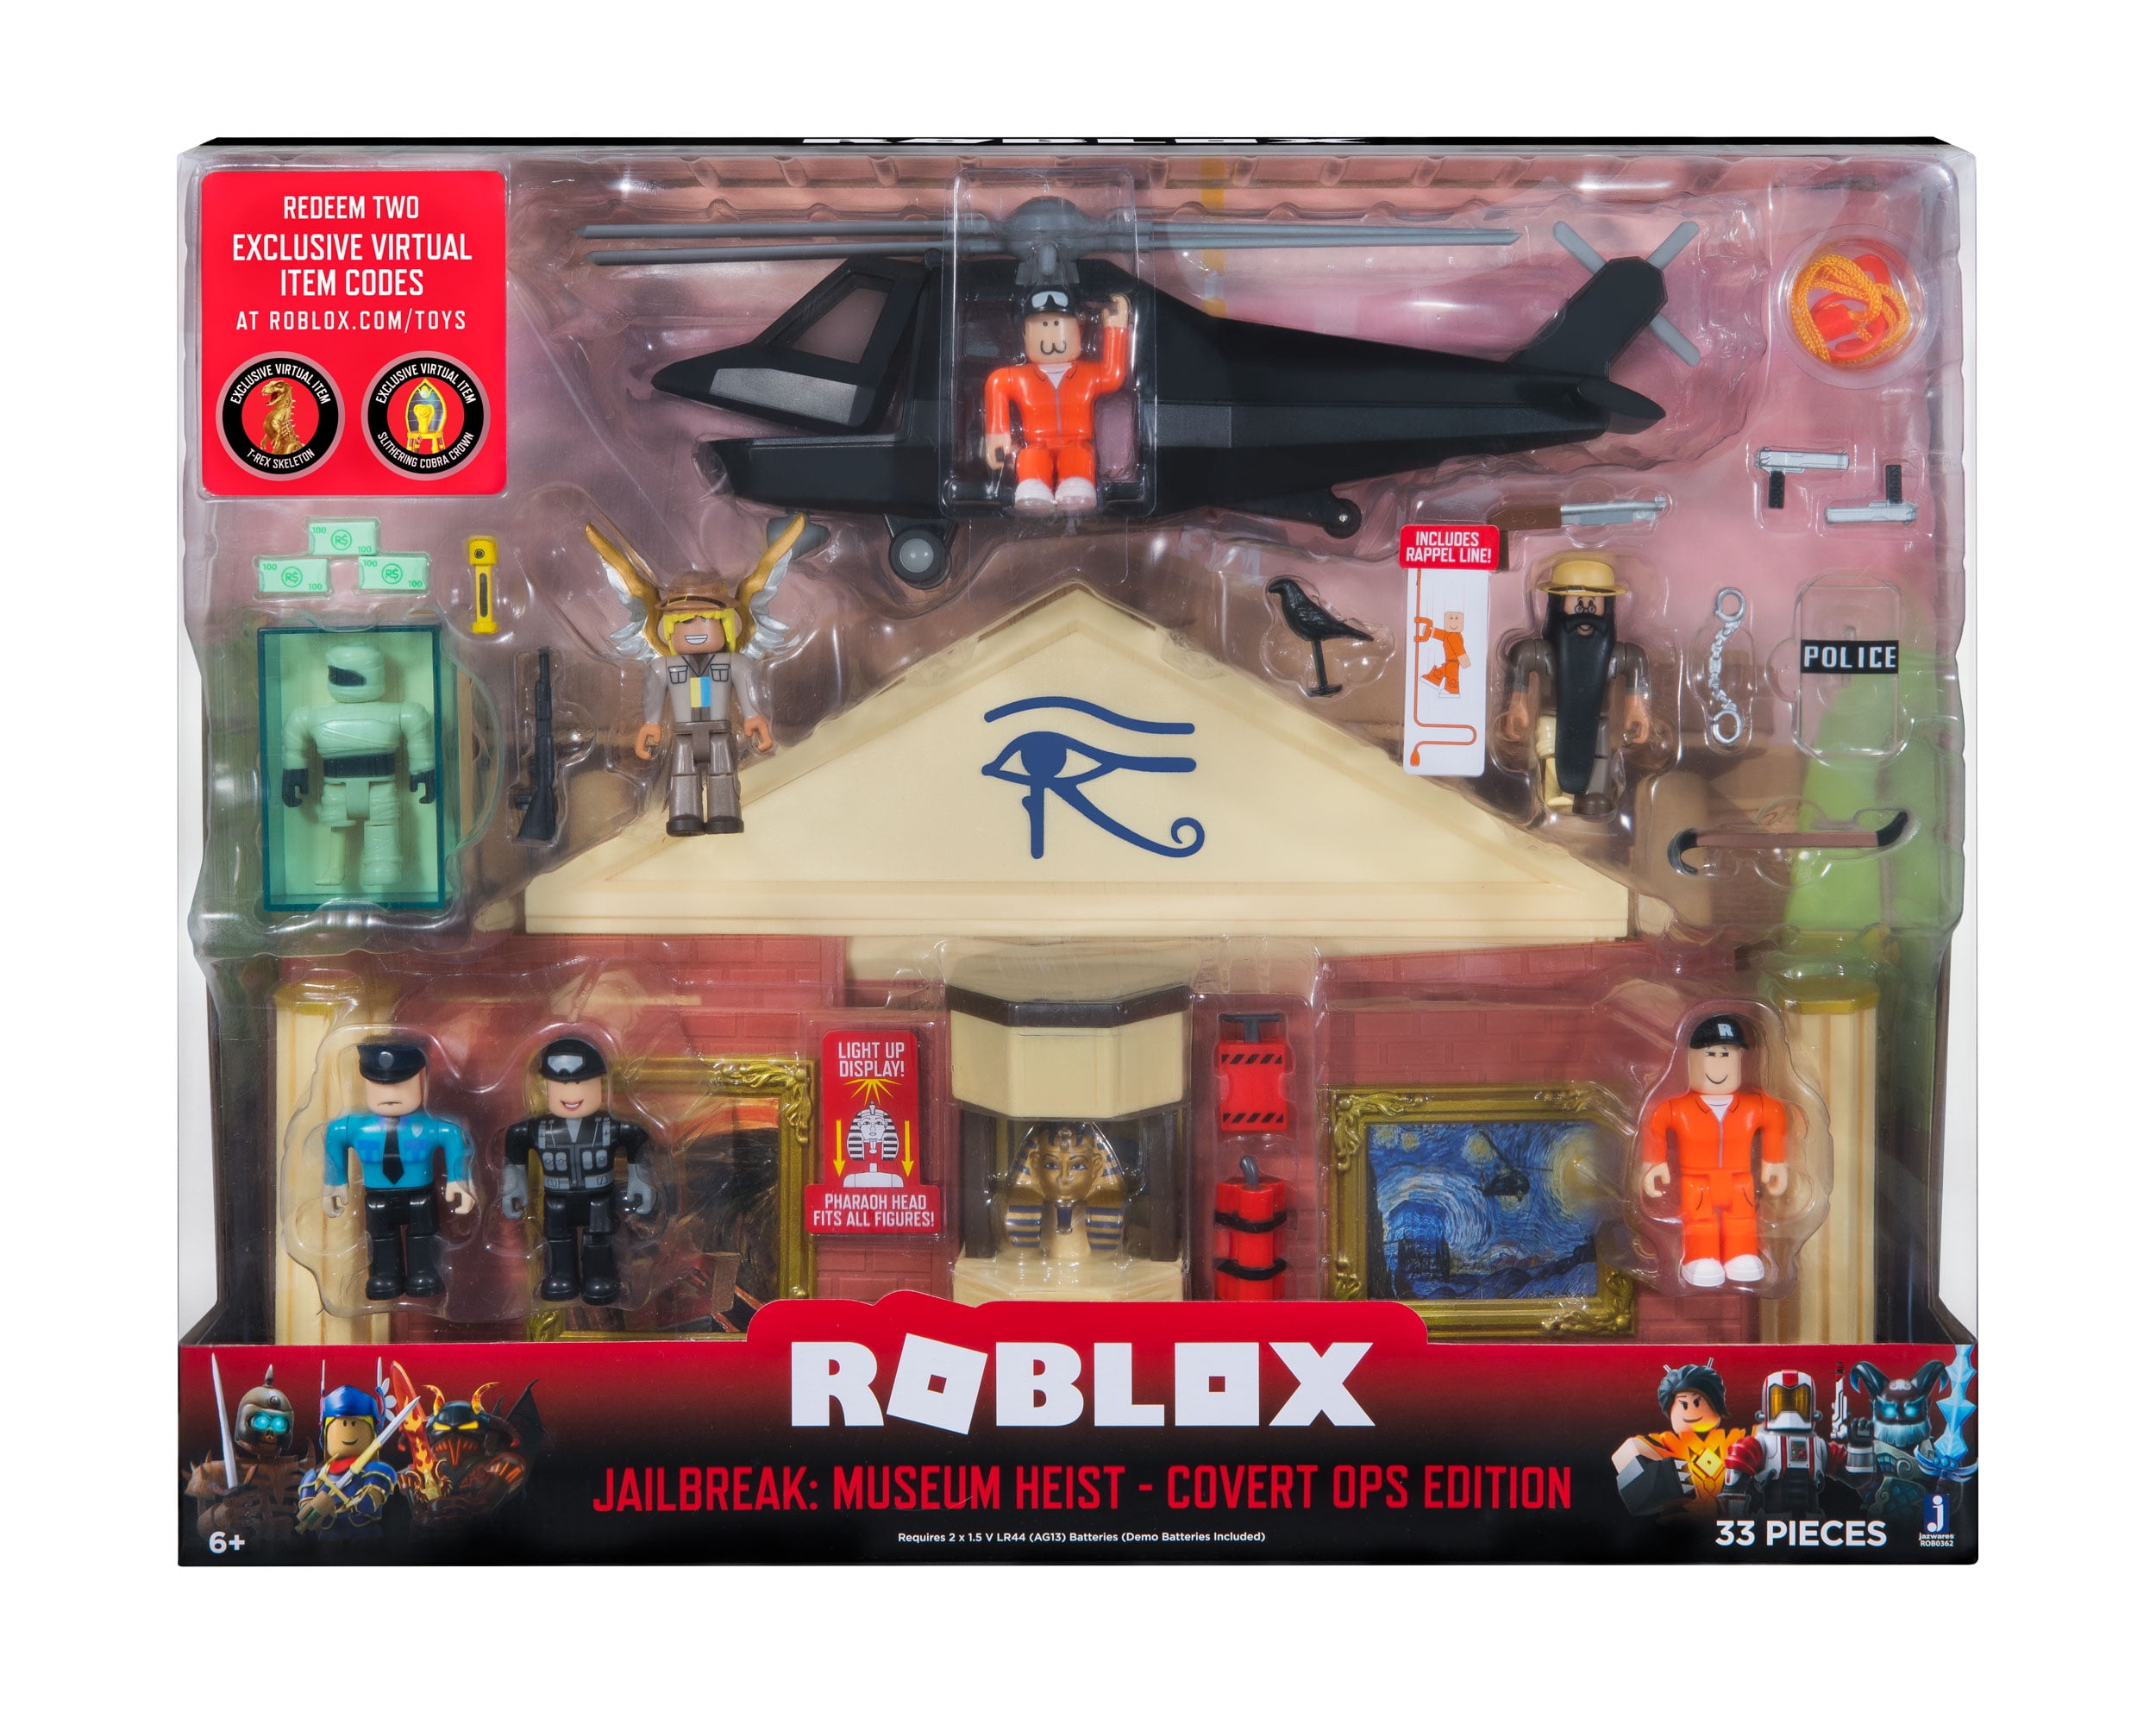 Roblox Action Collection Jailbreak Museum Heist Covert Ops Edition Playset Includes Two Exclusive Virtual Items Walmart Com Walmart Com - roblox jailbreak museum heist toy bonus code